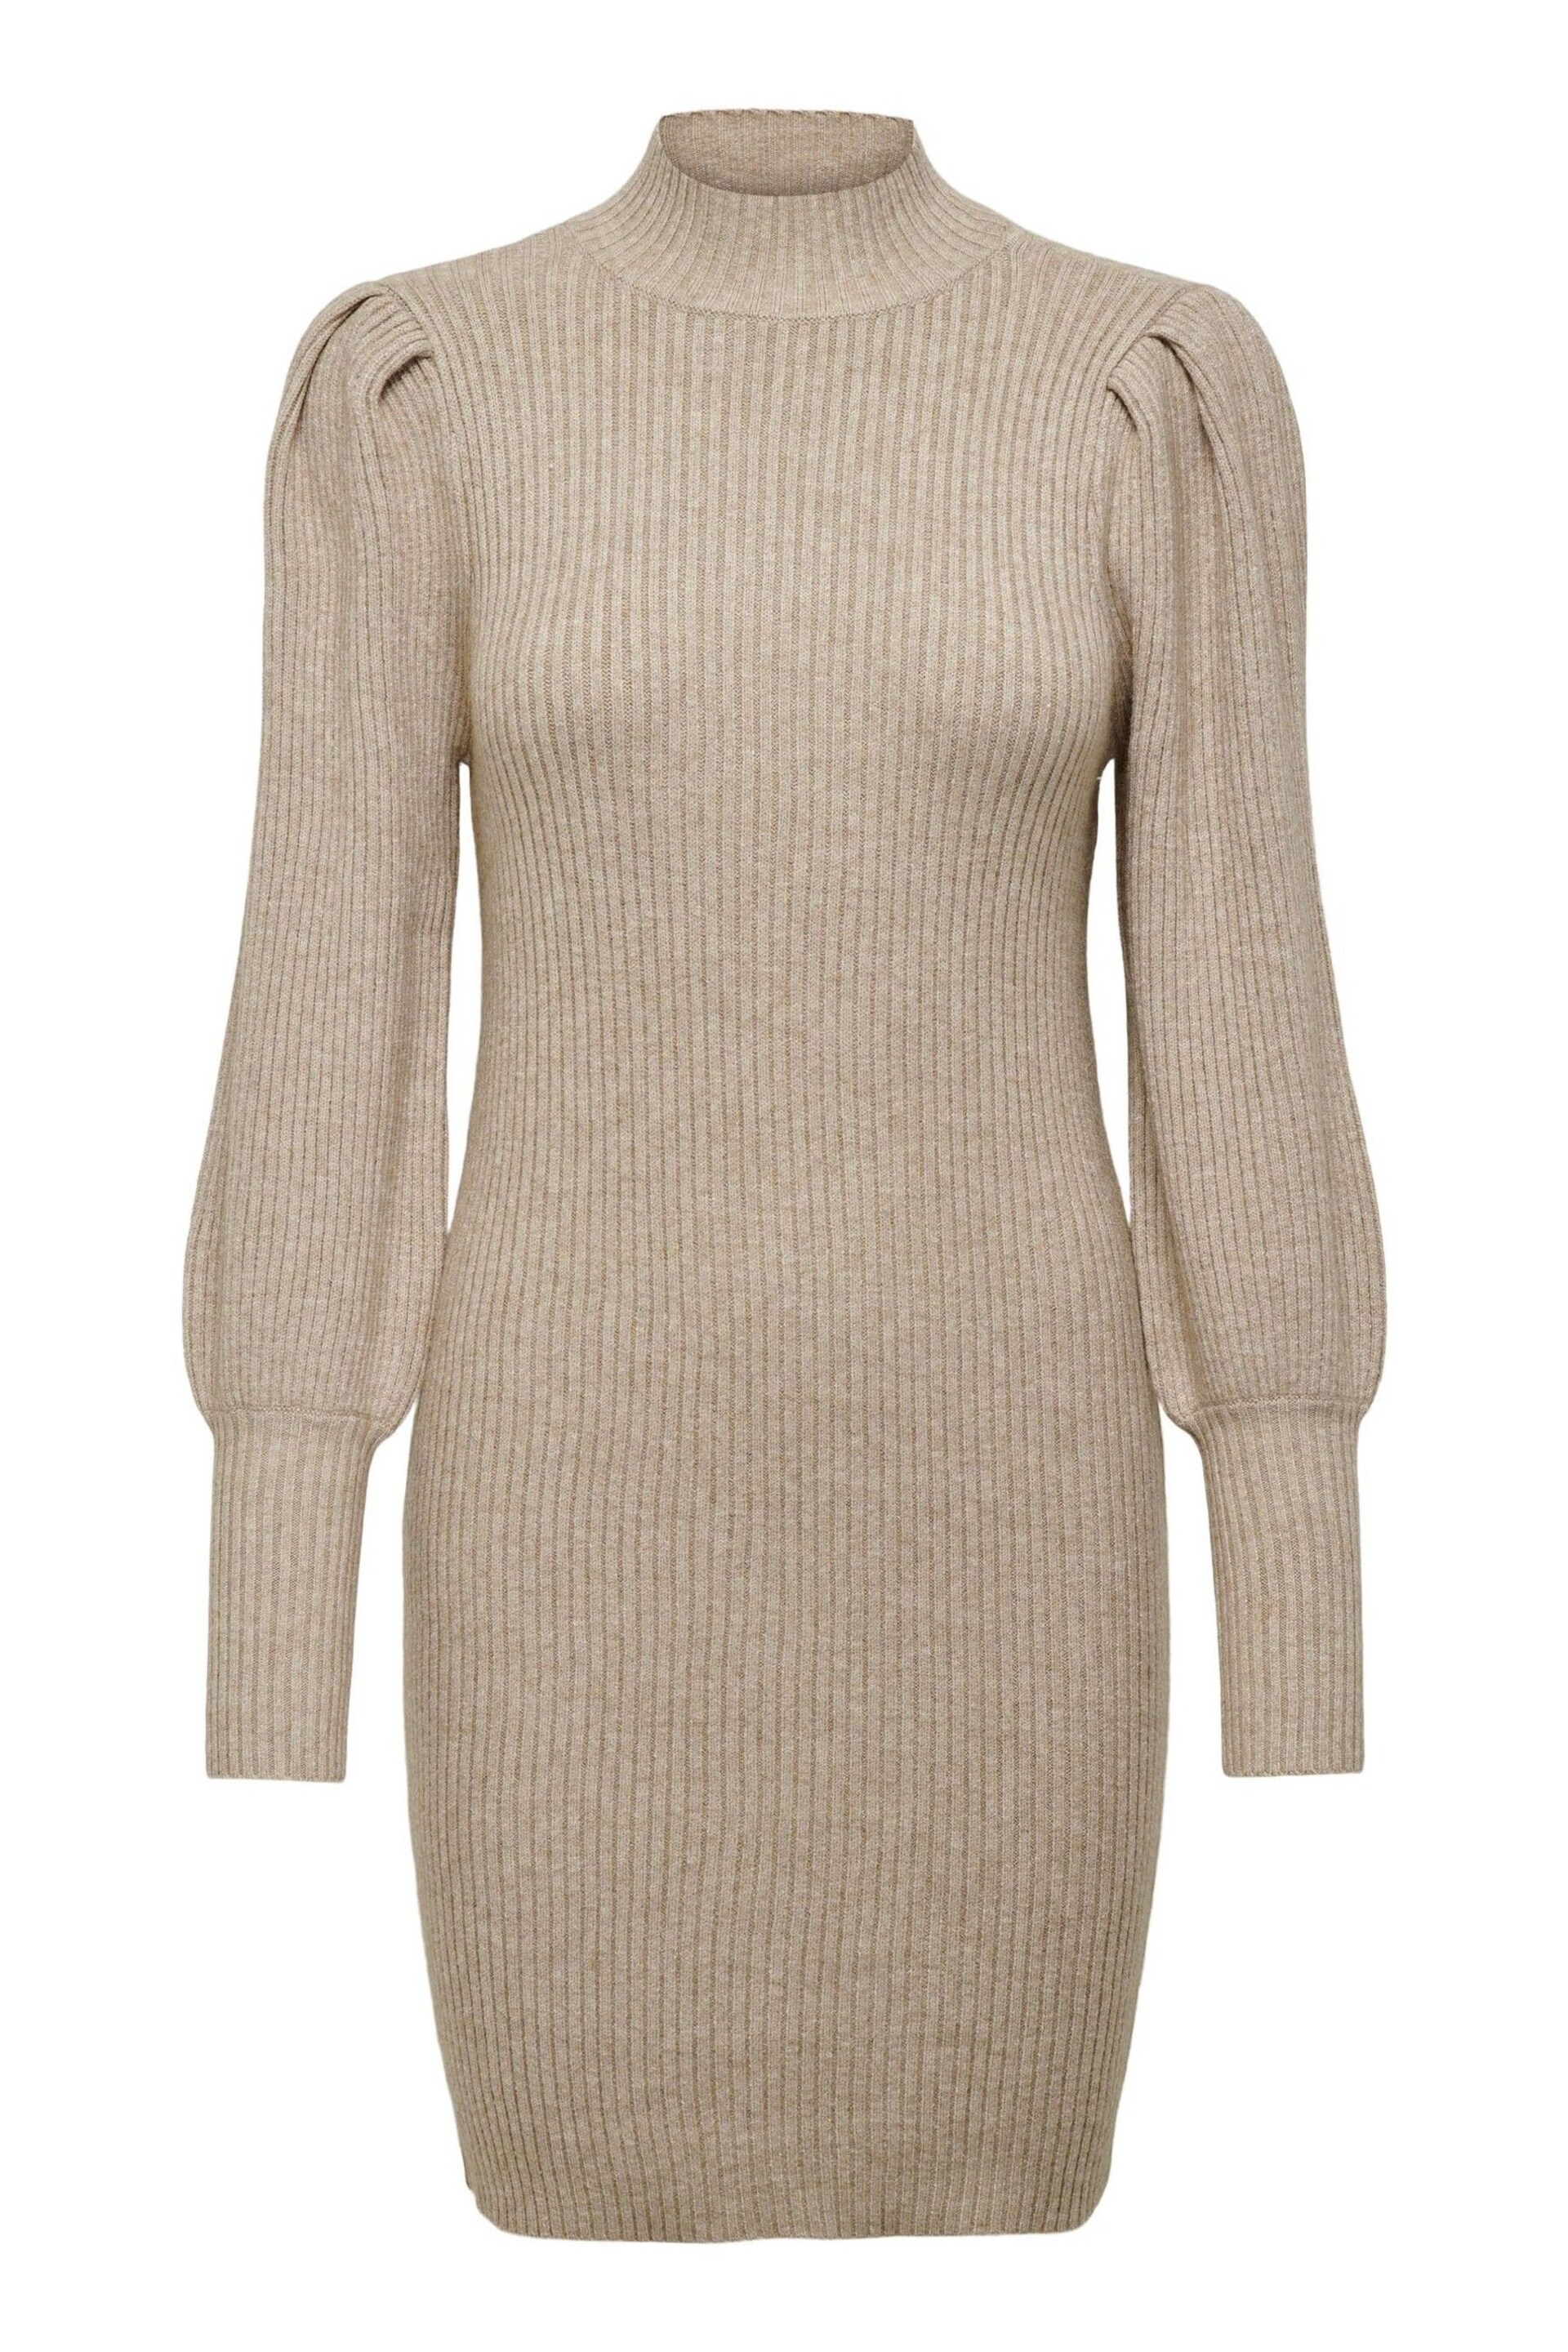 ONLY Brown Puff Sleeve Knitted Jumper Dress - Image 5 of 5